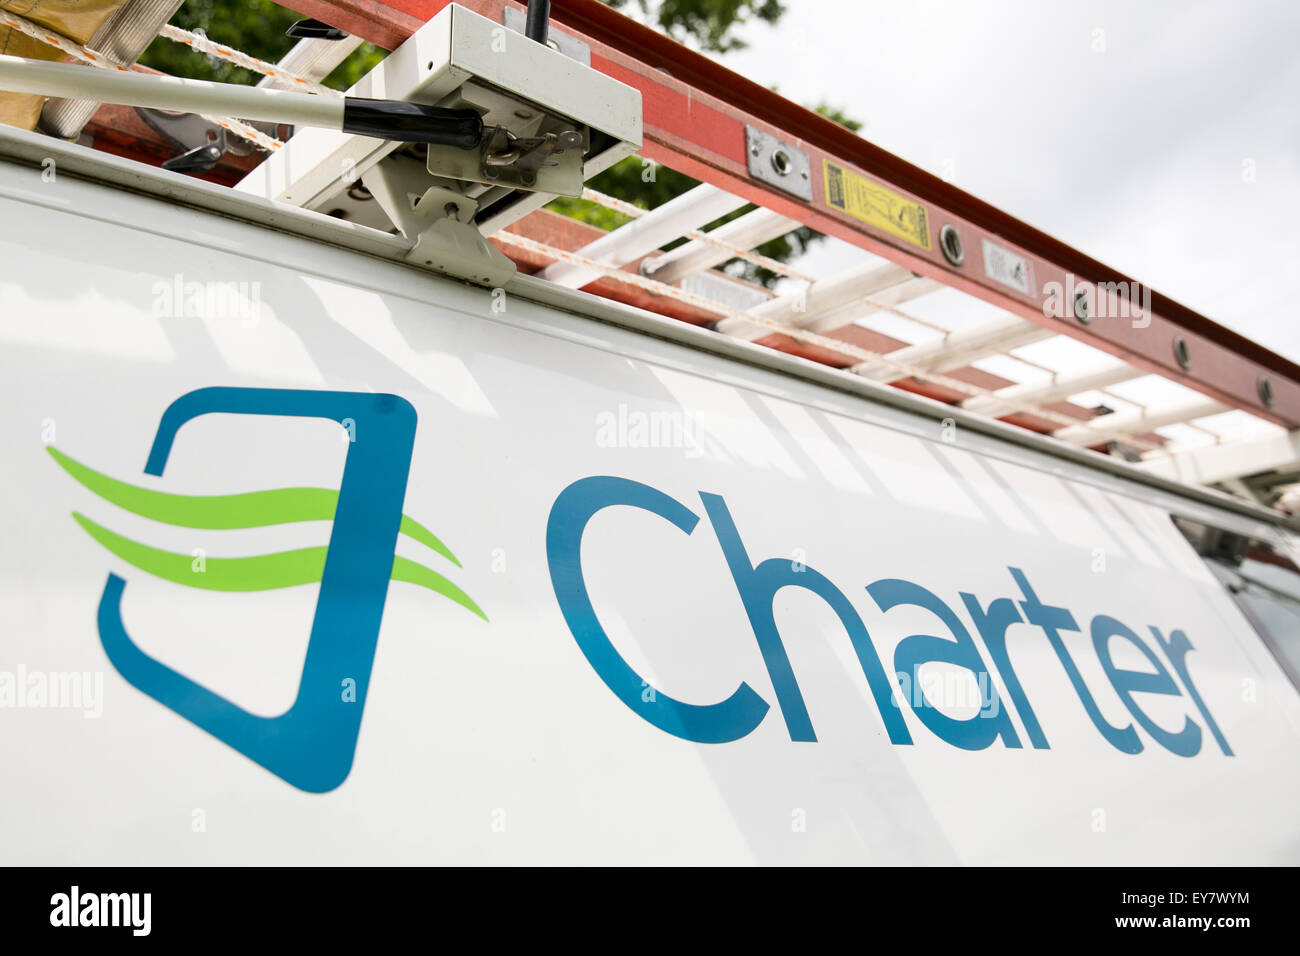 A Charter logo on a cable TV installation van belonging to Charter Communications, Inc. in Onancock, Virginia on July 18, 2015. Stock Photo